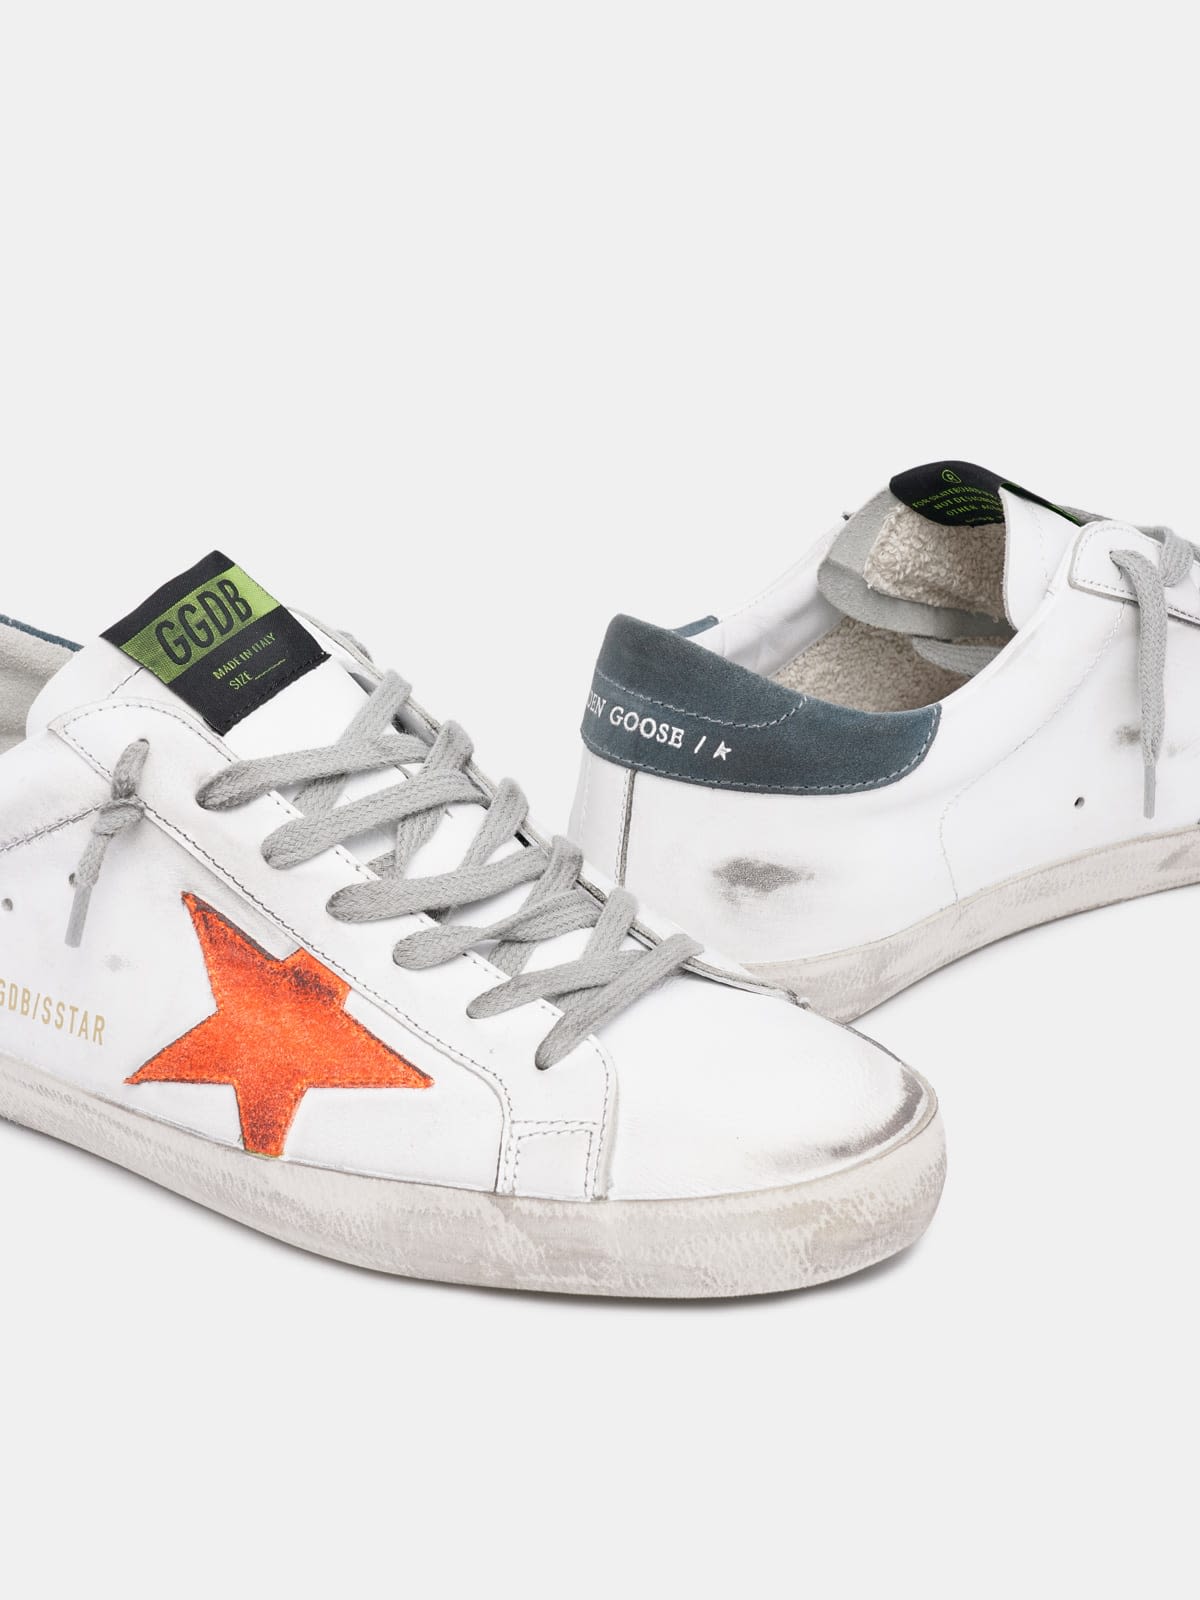 White Super-Star sneakers with orange star